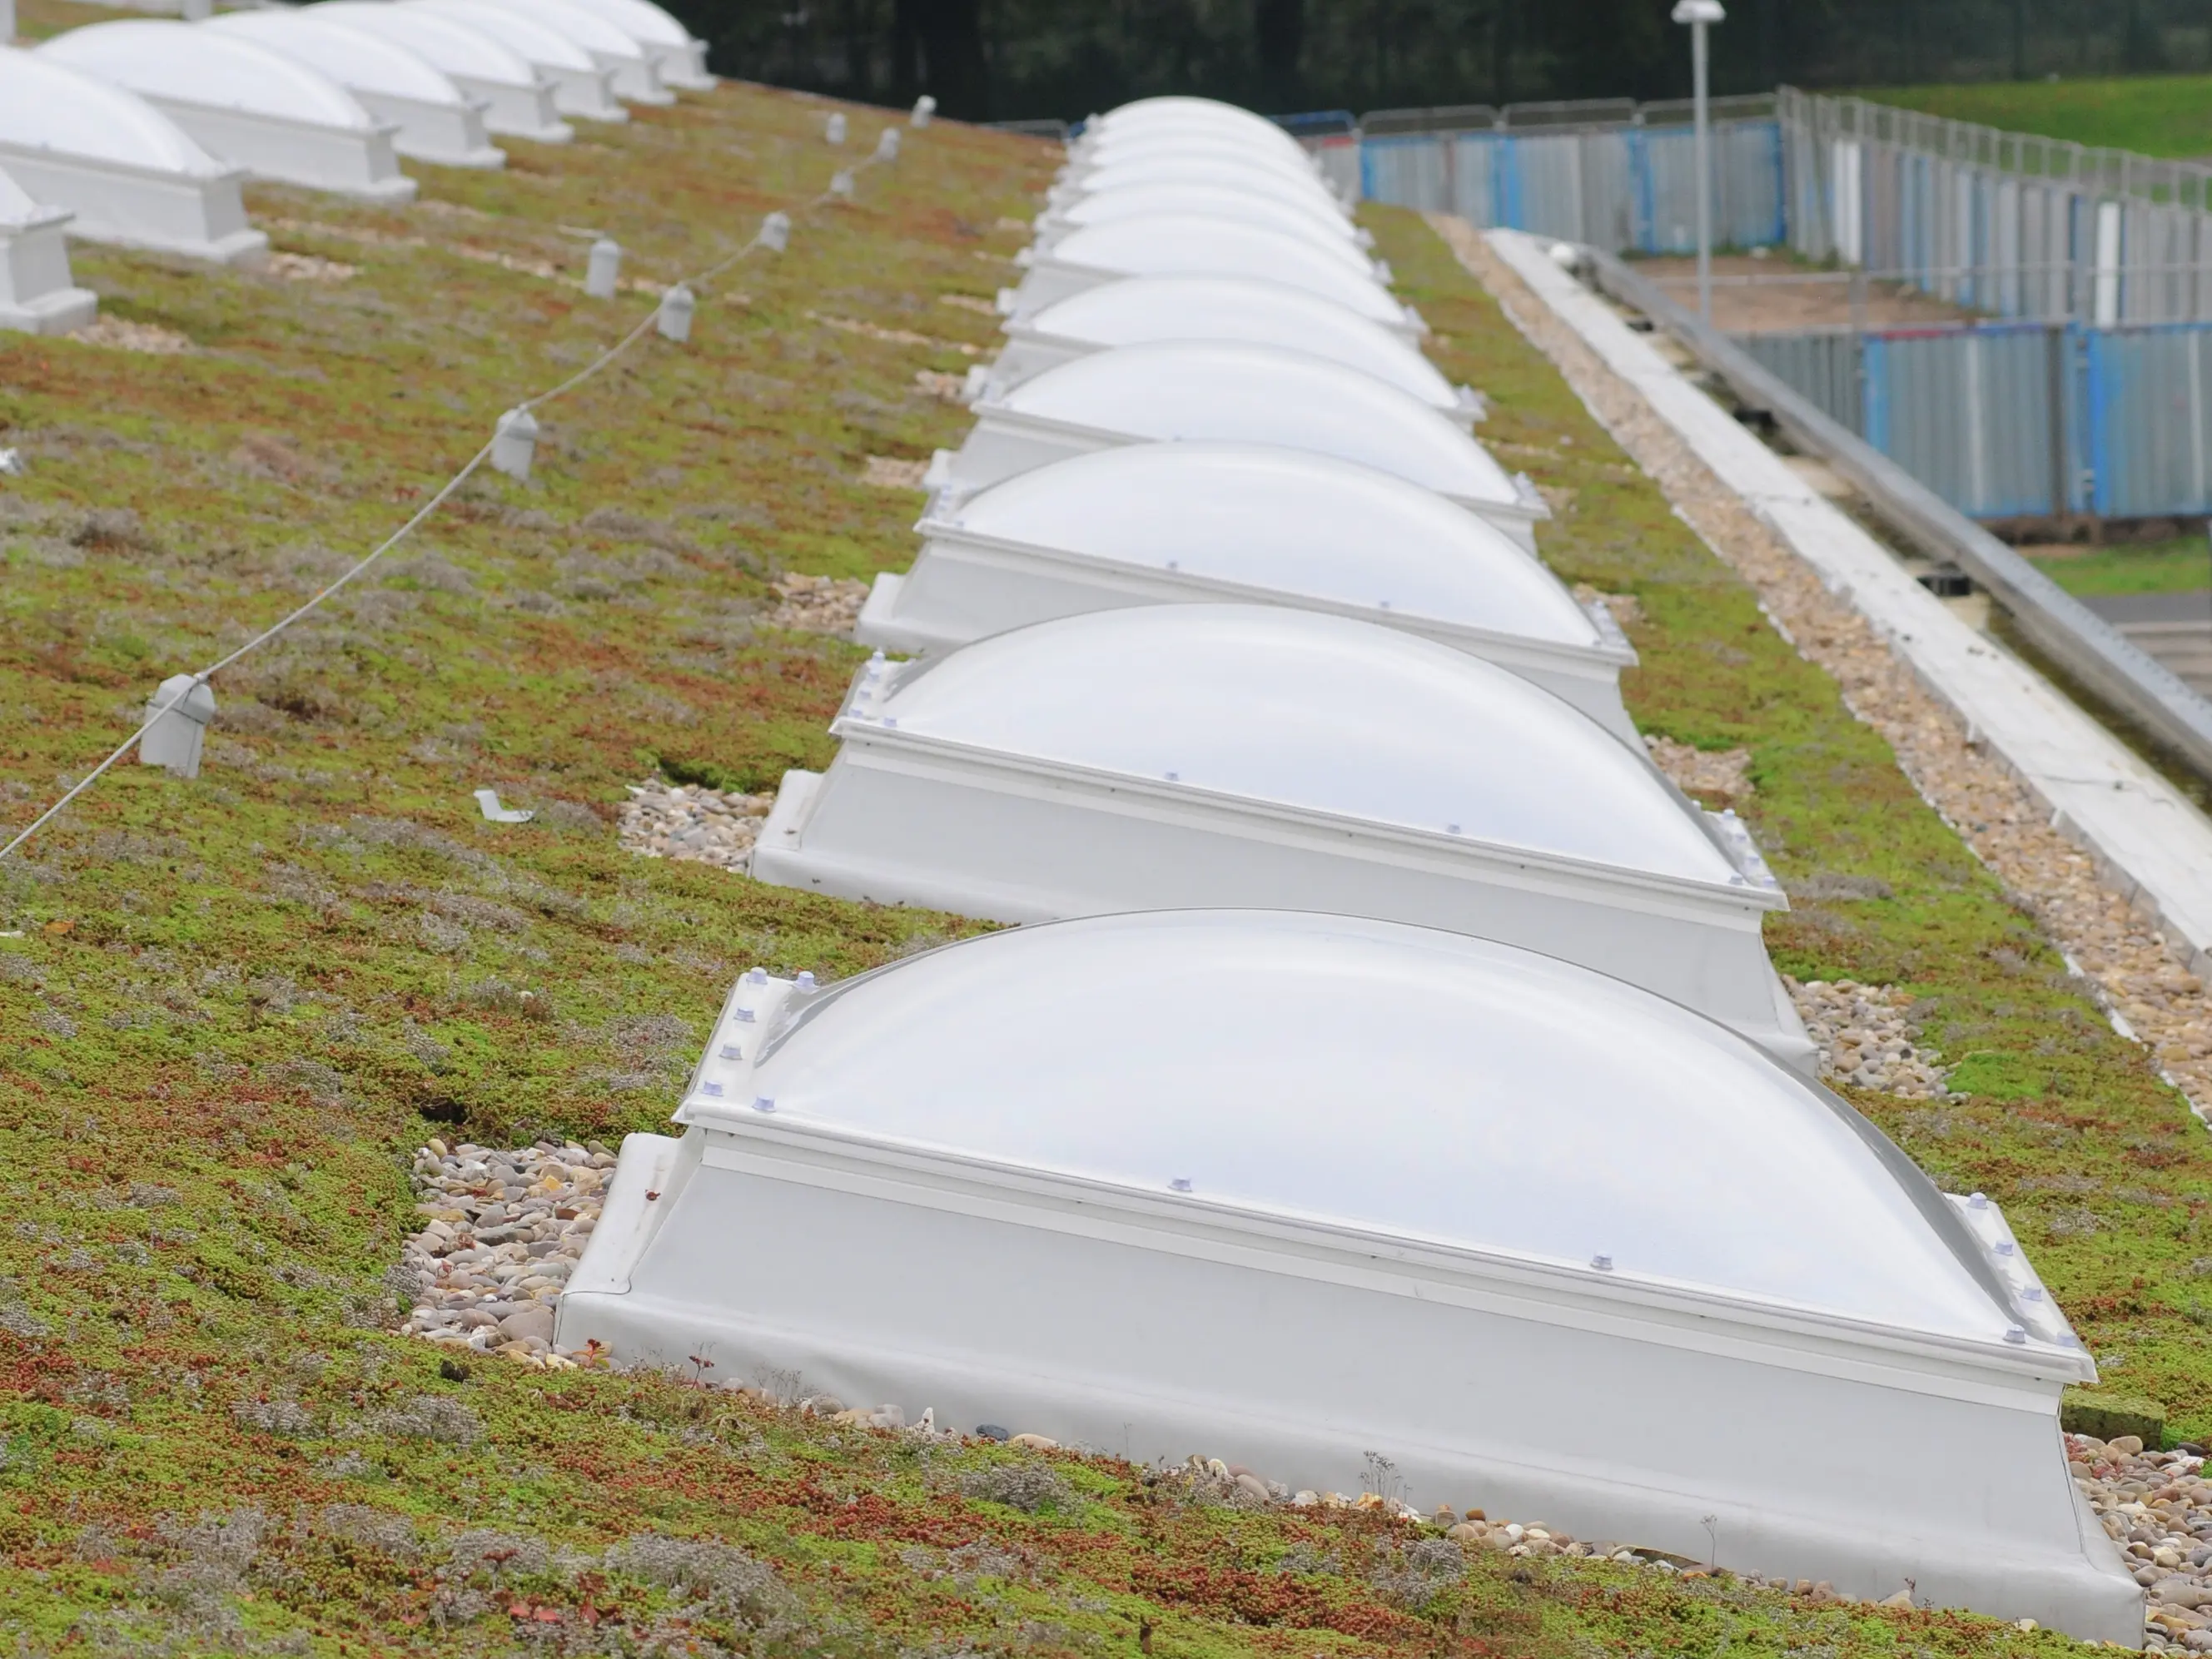 529662-01 Row-of-polycarbonate-dome-rooflights.JPG